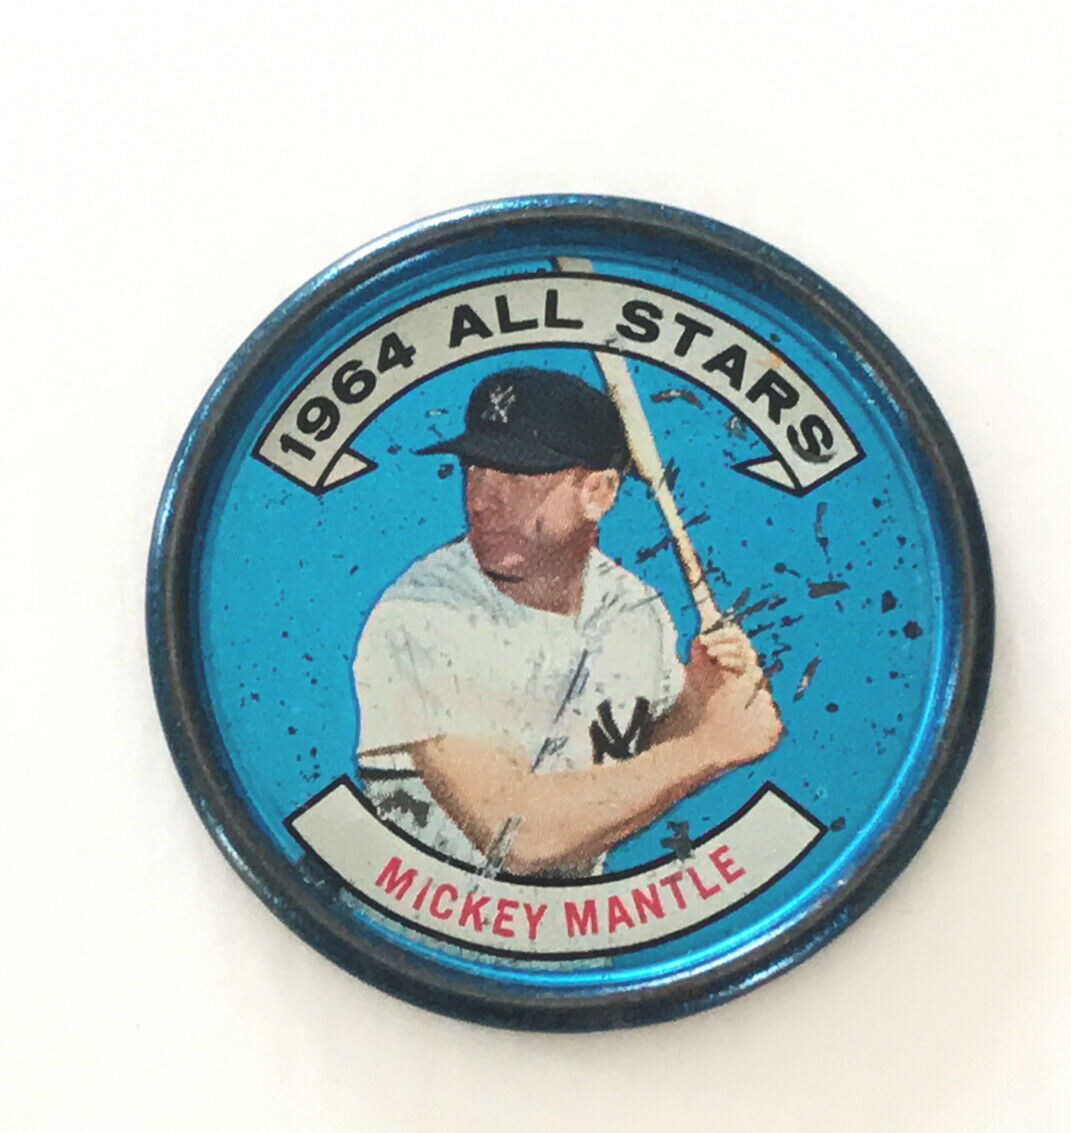 1964 Topps Coin #131 Mickey Mantle All Star Batting Left Handed Low Grade